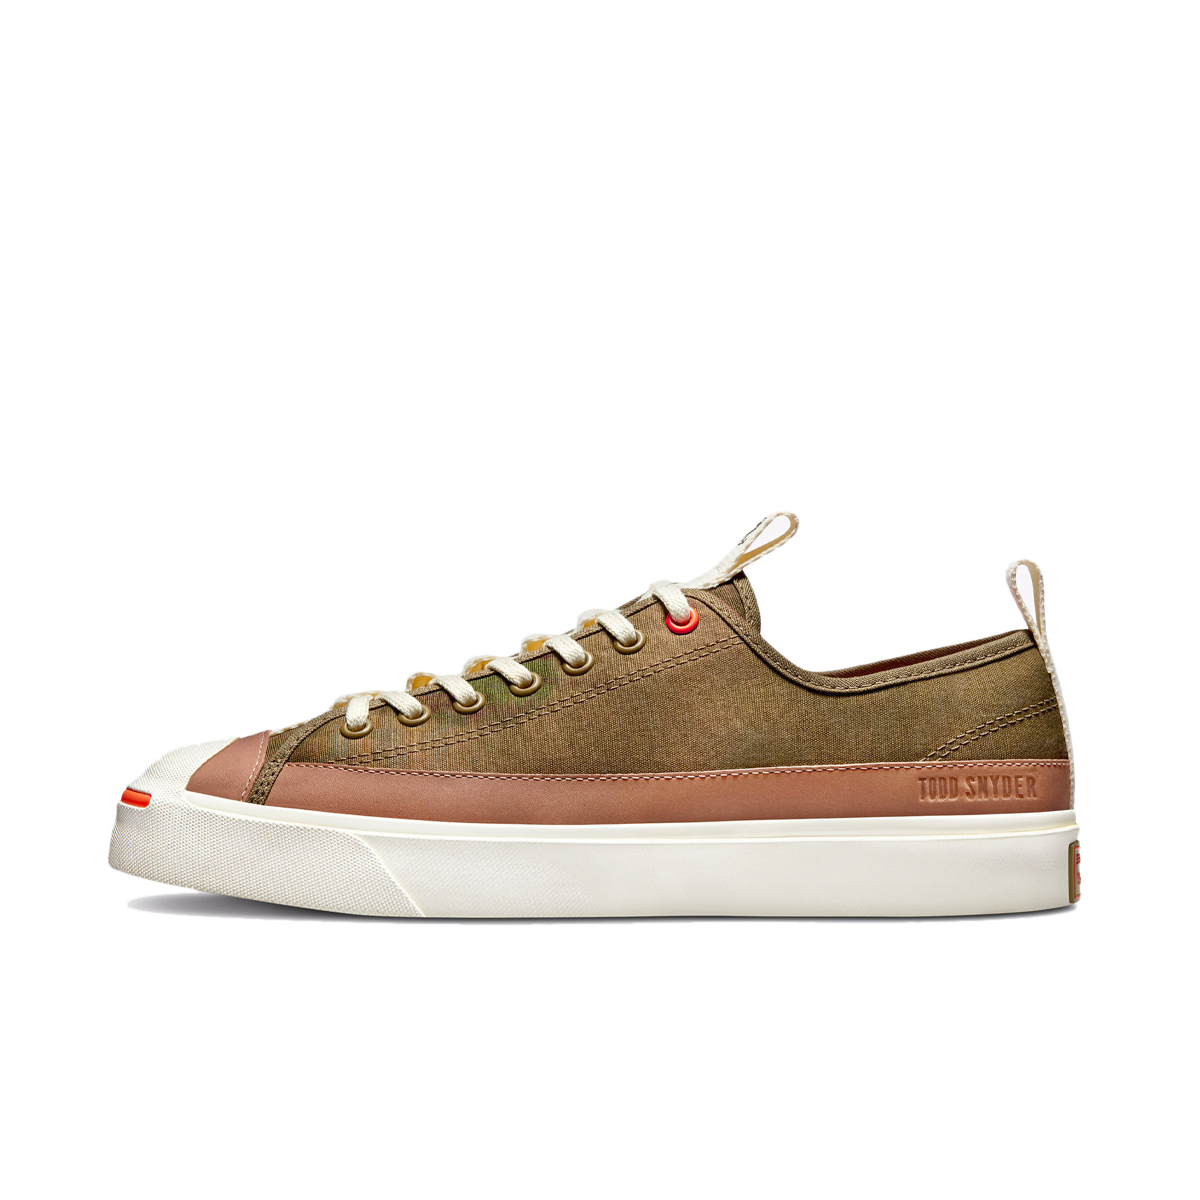 Todd Snyder x Converse Jack Purcell 'Champagne Tan'